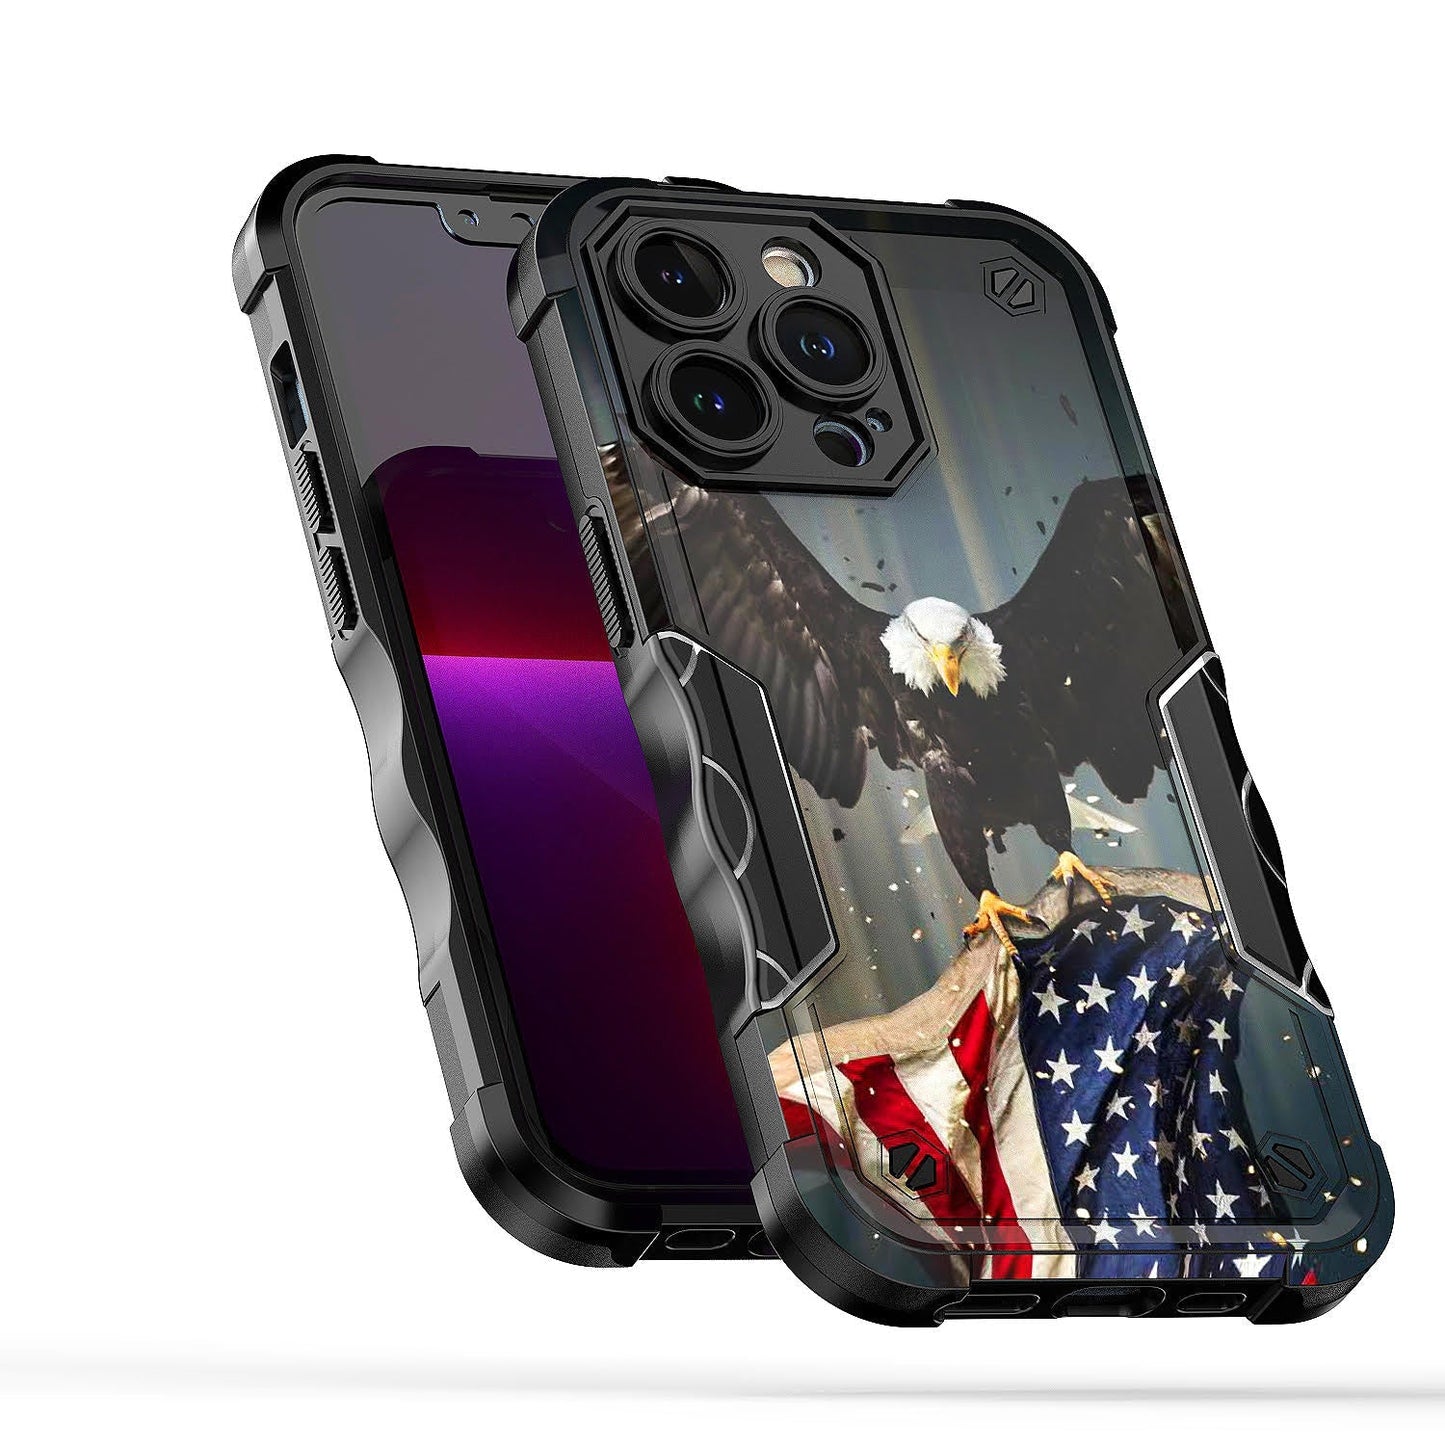 Case For Apple iPhone 13 Pro Max - Hybrid Grip Design Shockproof Phone Cover - American Bald Eagle Flying with Flag